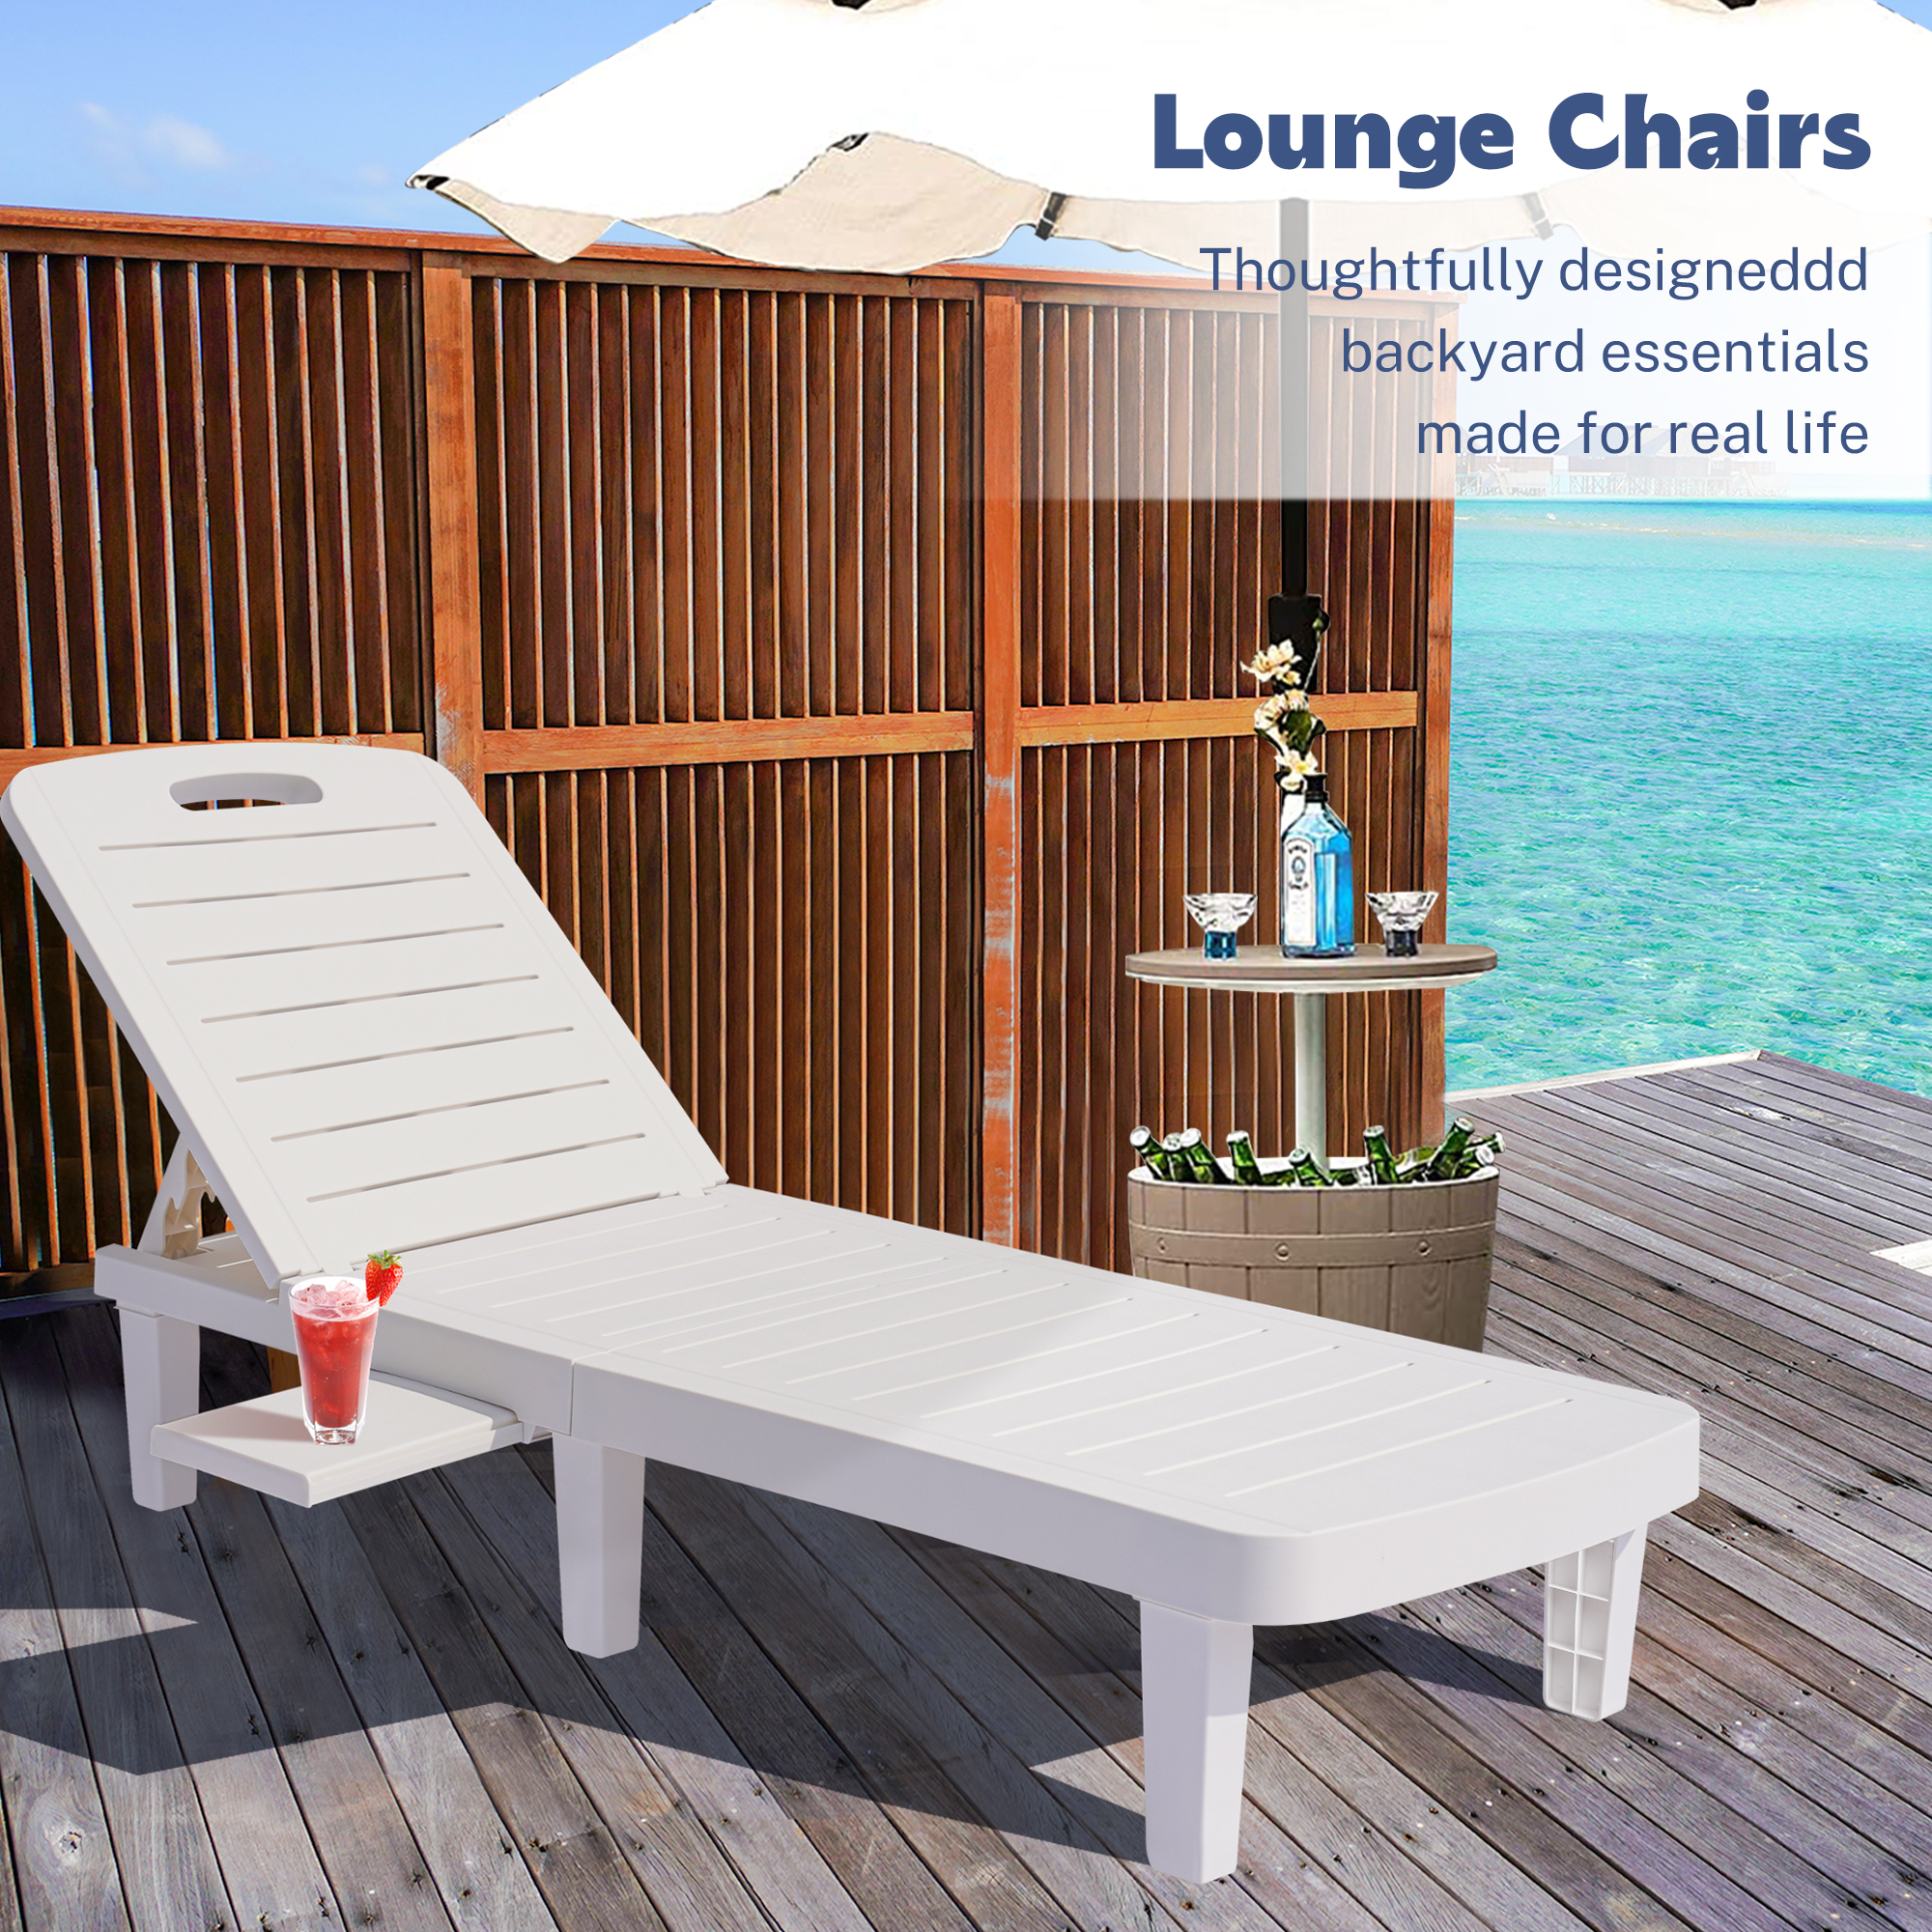 Patio Lounge Reclining, SEGMART Outdoor Rattan Recliner Chair with Side Table, Recliner 5-Position Adjustable for Garden, Pool, Poolside (1, White), SS703 - image 4 of 11